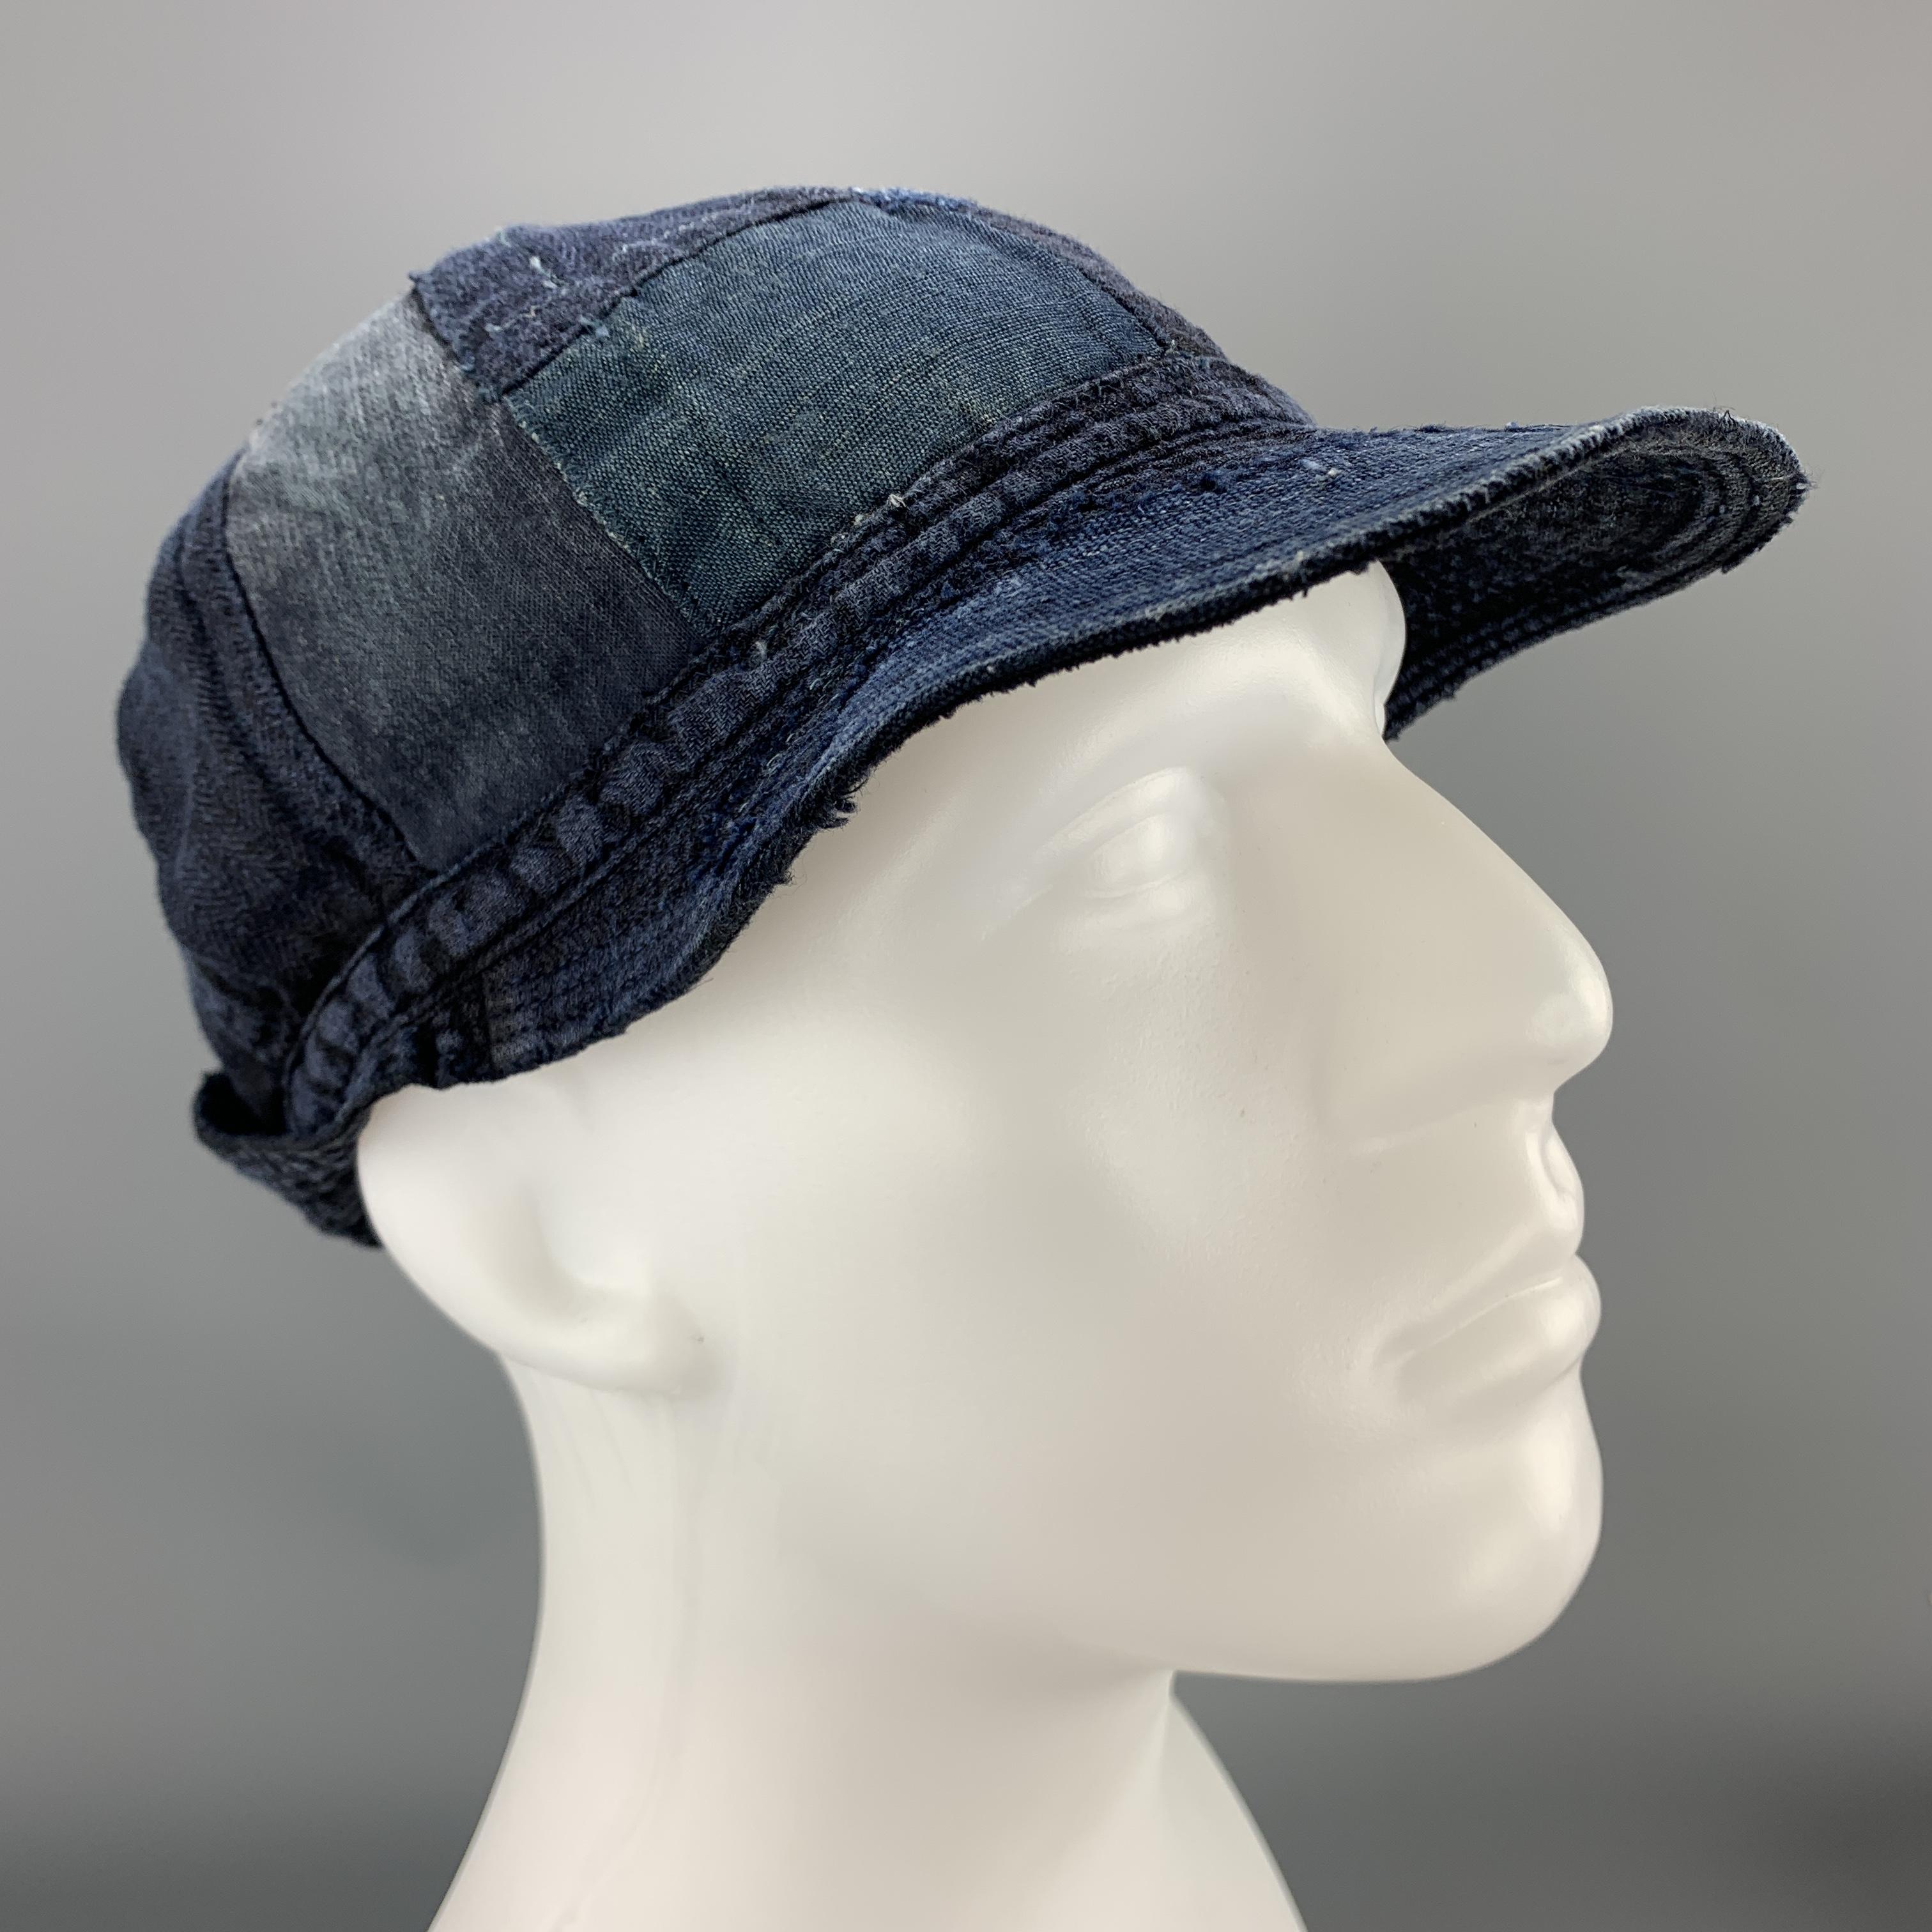 KAPITAL hat comes in light weight indago denim blue linen with patchwork throughout, quilted brim, and buttoned back detail. Made in Japan.

New with Tags.

Measurements:

Opening: 24 in.
Brim: 3 in.
Height: 5 in.